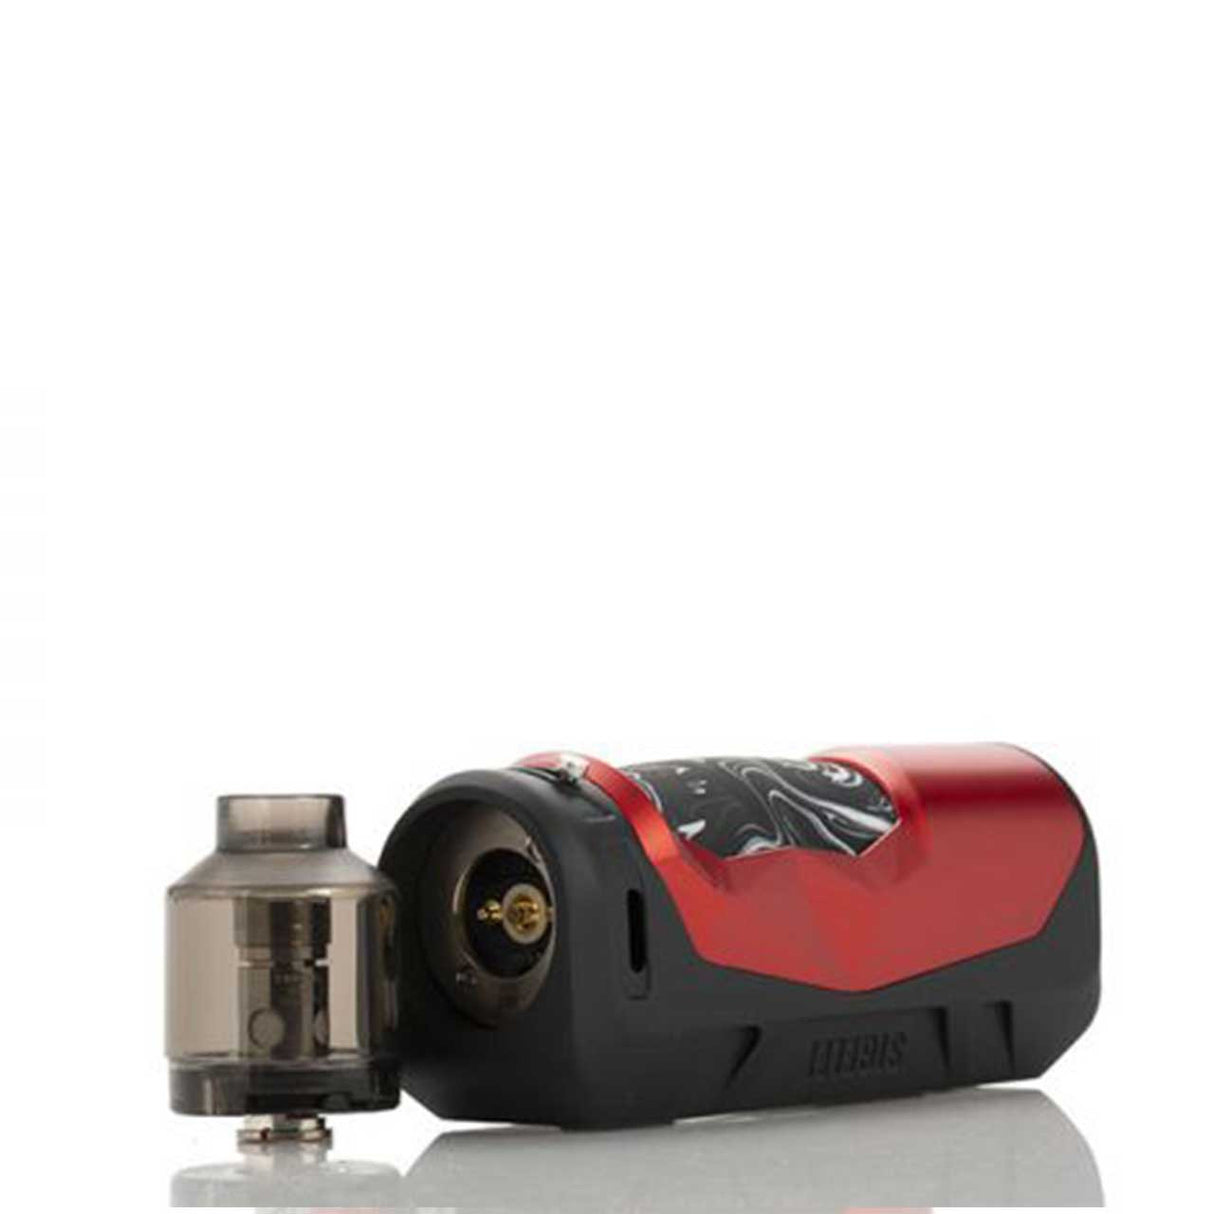 Sigelei HUMVEE 80W Box Mod Starter Kit with zinc-alloy body and rubberized hand grip. With Tip Removed